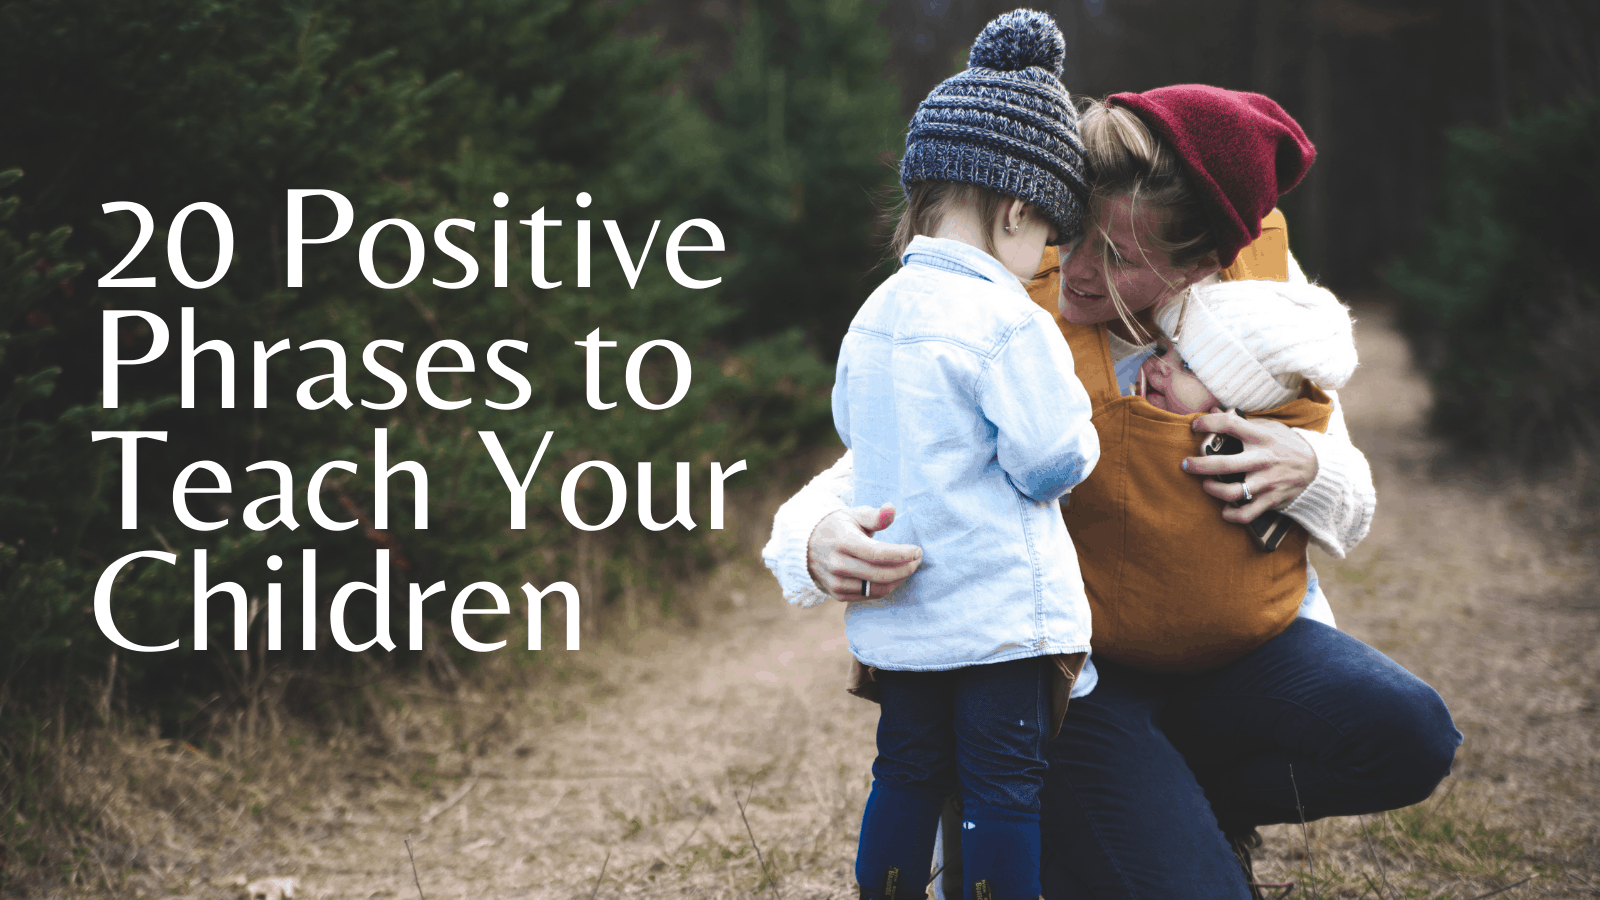 20 Positive Phrases to Teach Your Children